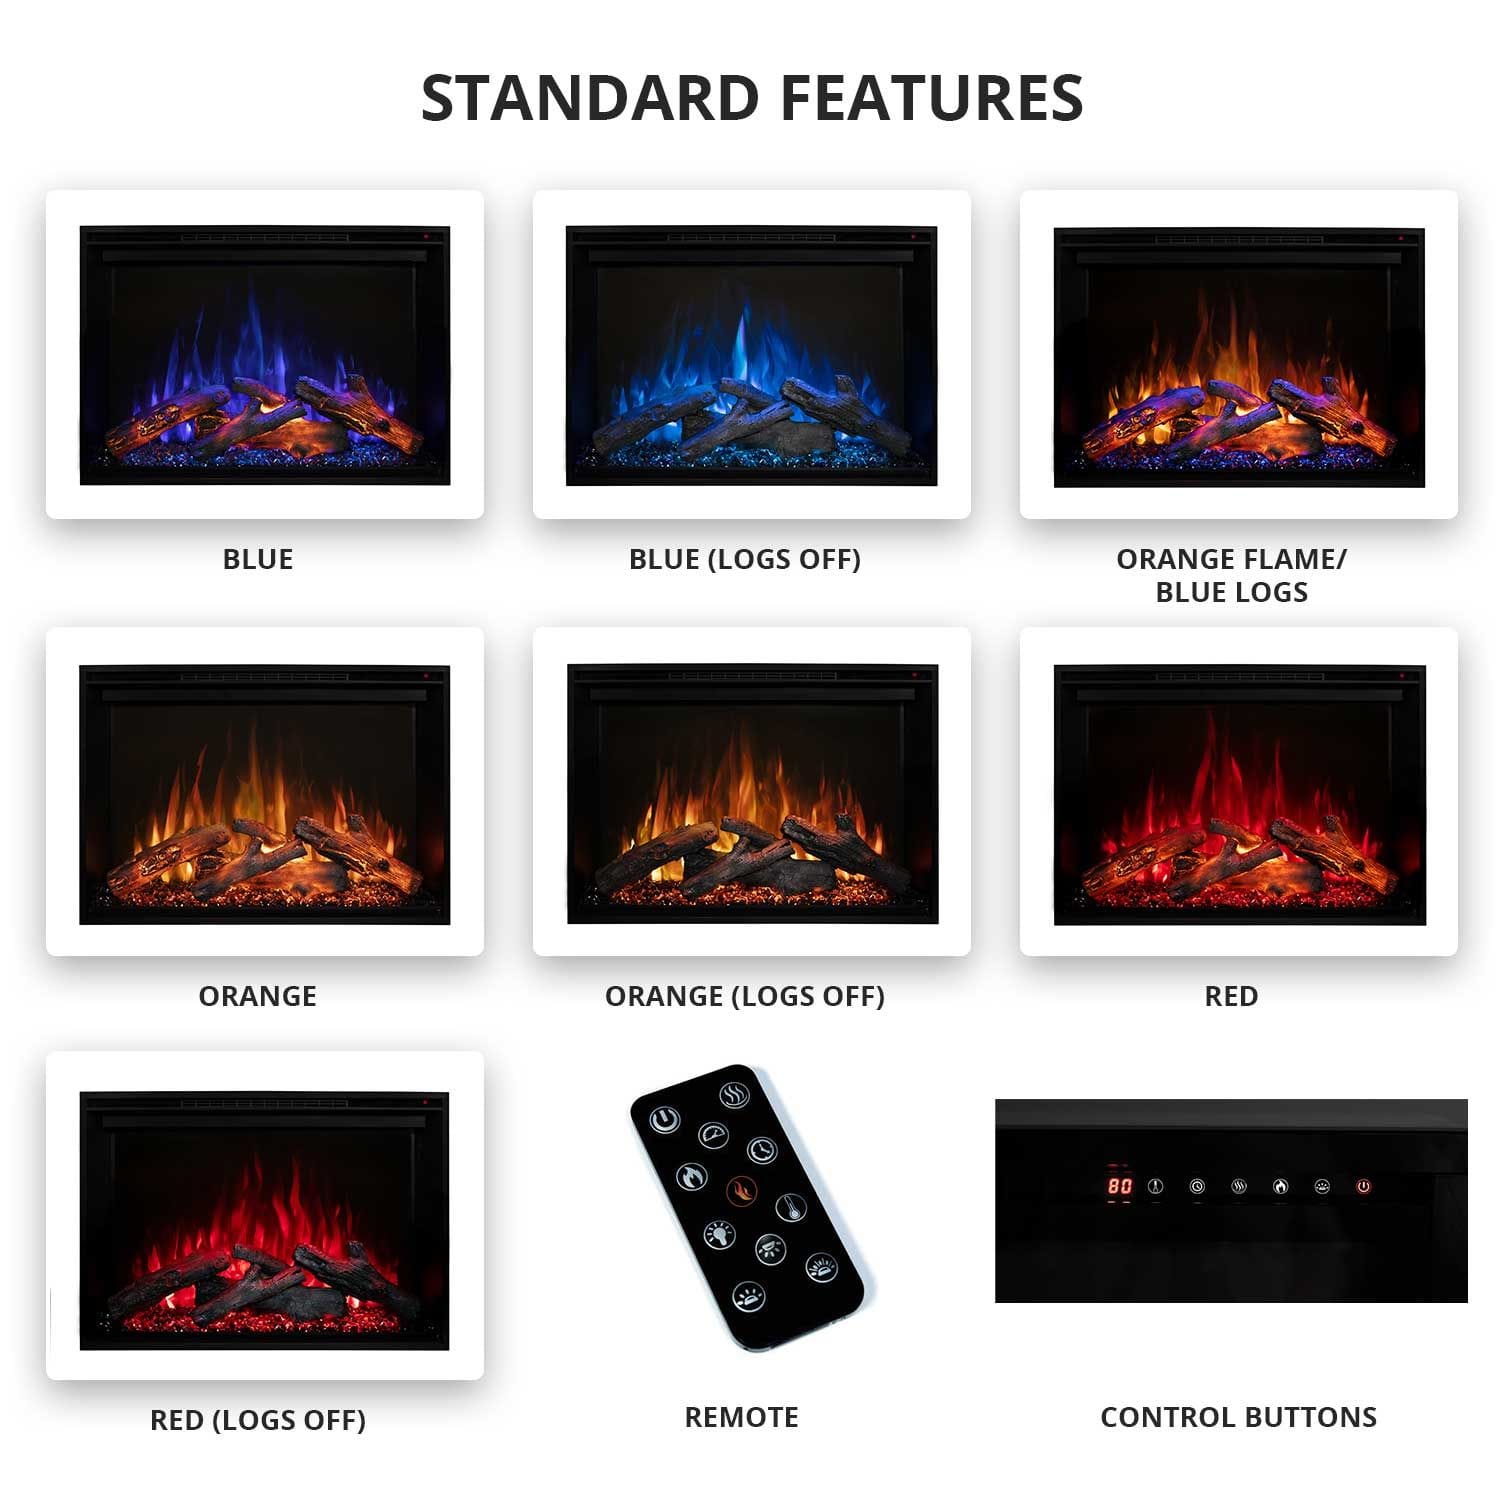 Modern Flames Built-In Electric Fireplace with Different Standard Features